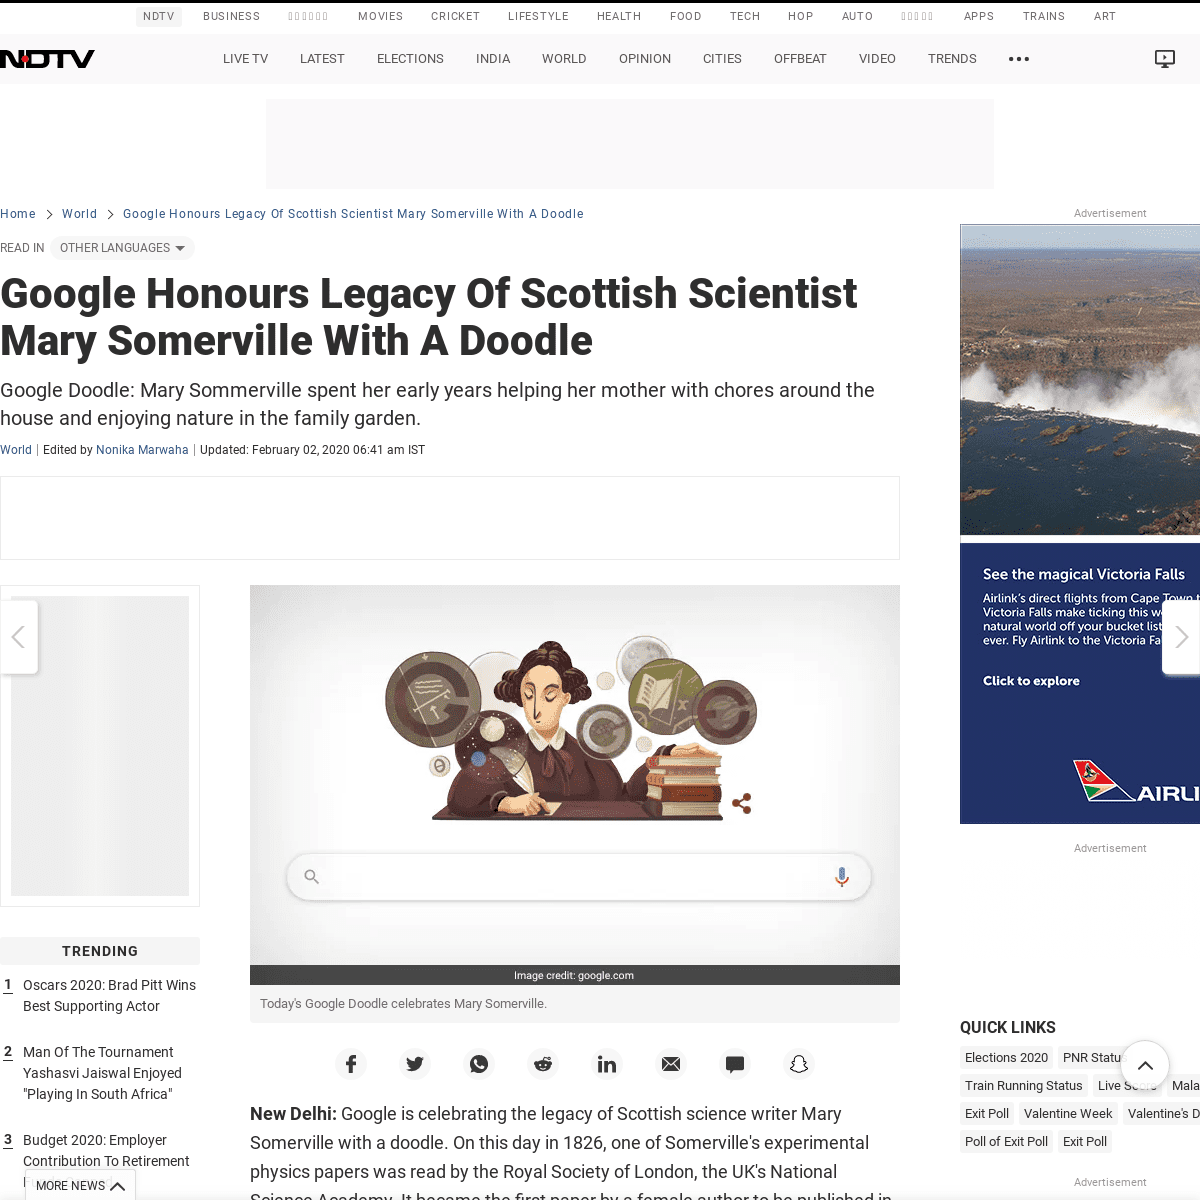 A complete backup of www.ndtv.com/world-news/google-honours-legacy-of-scottish-scientist-mary-somerville-with-a-doodle-2173445